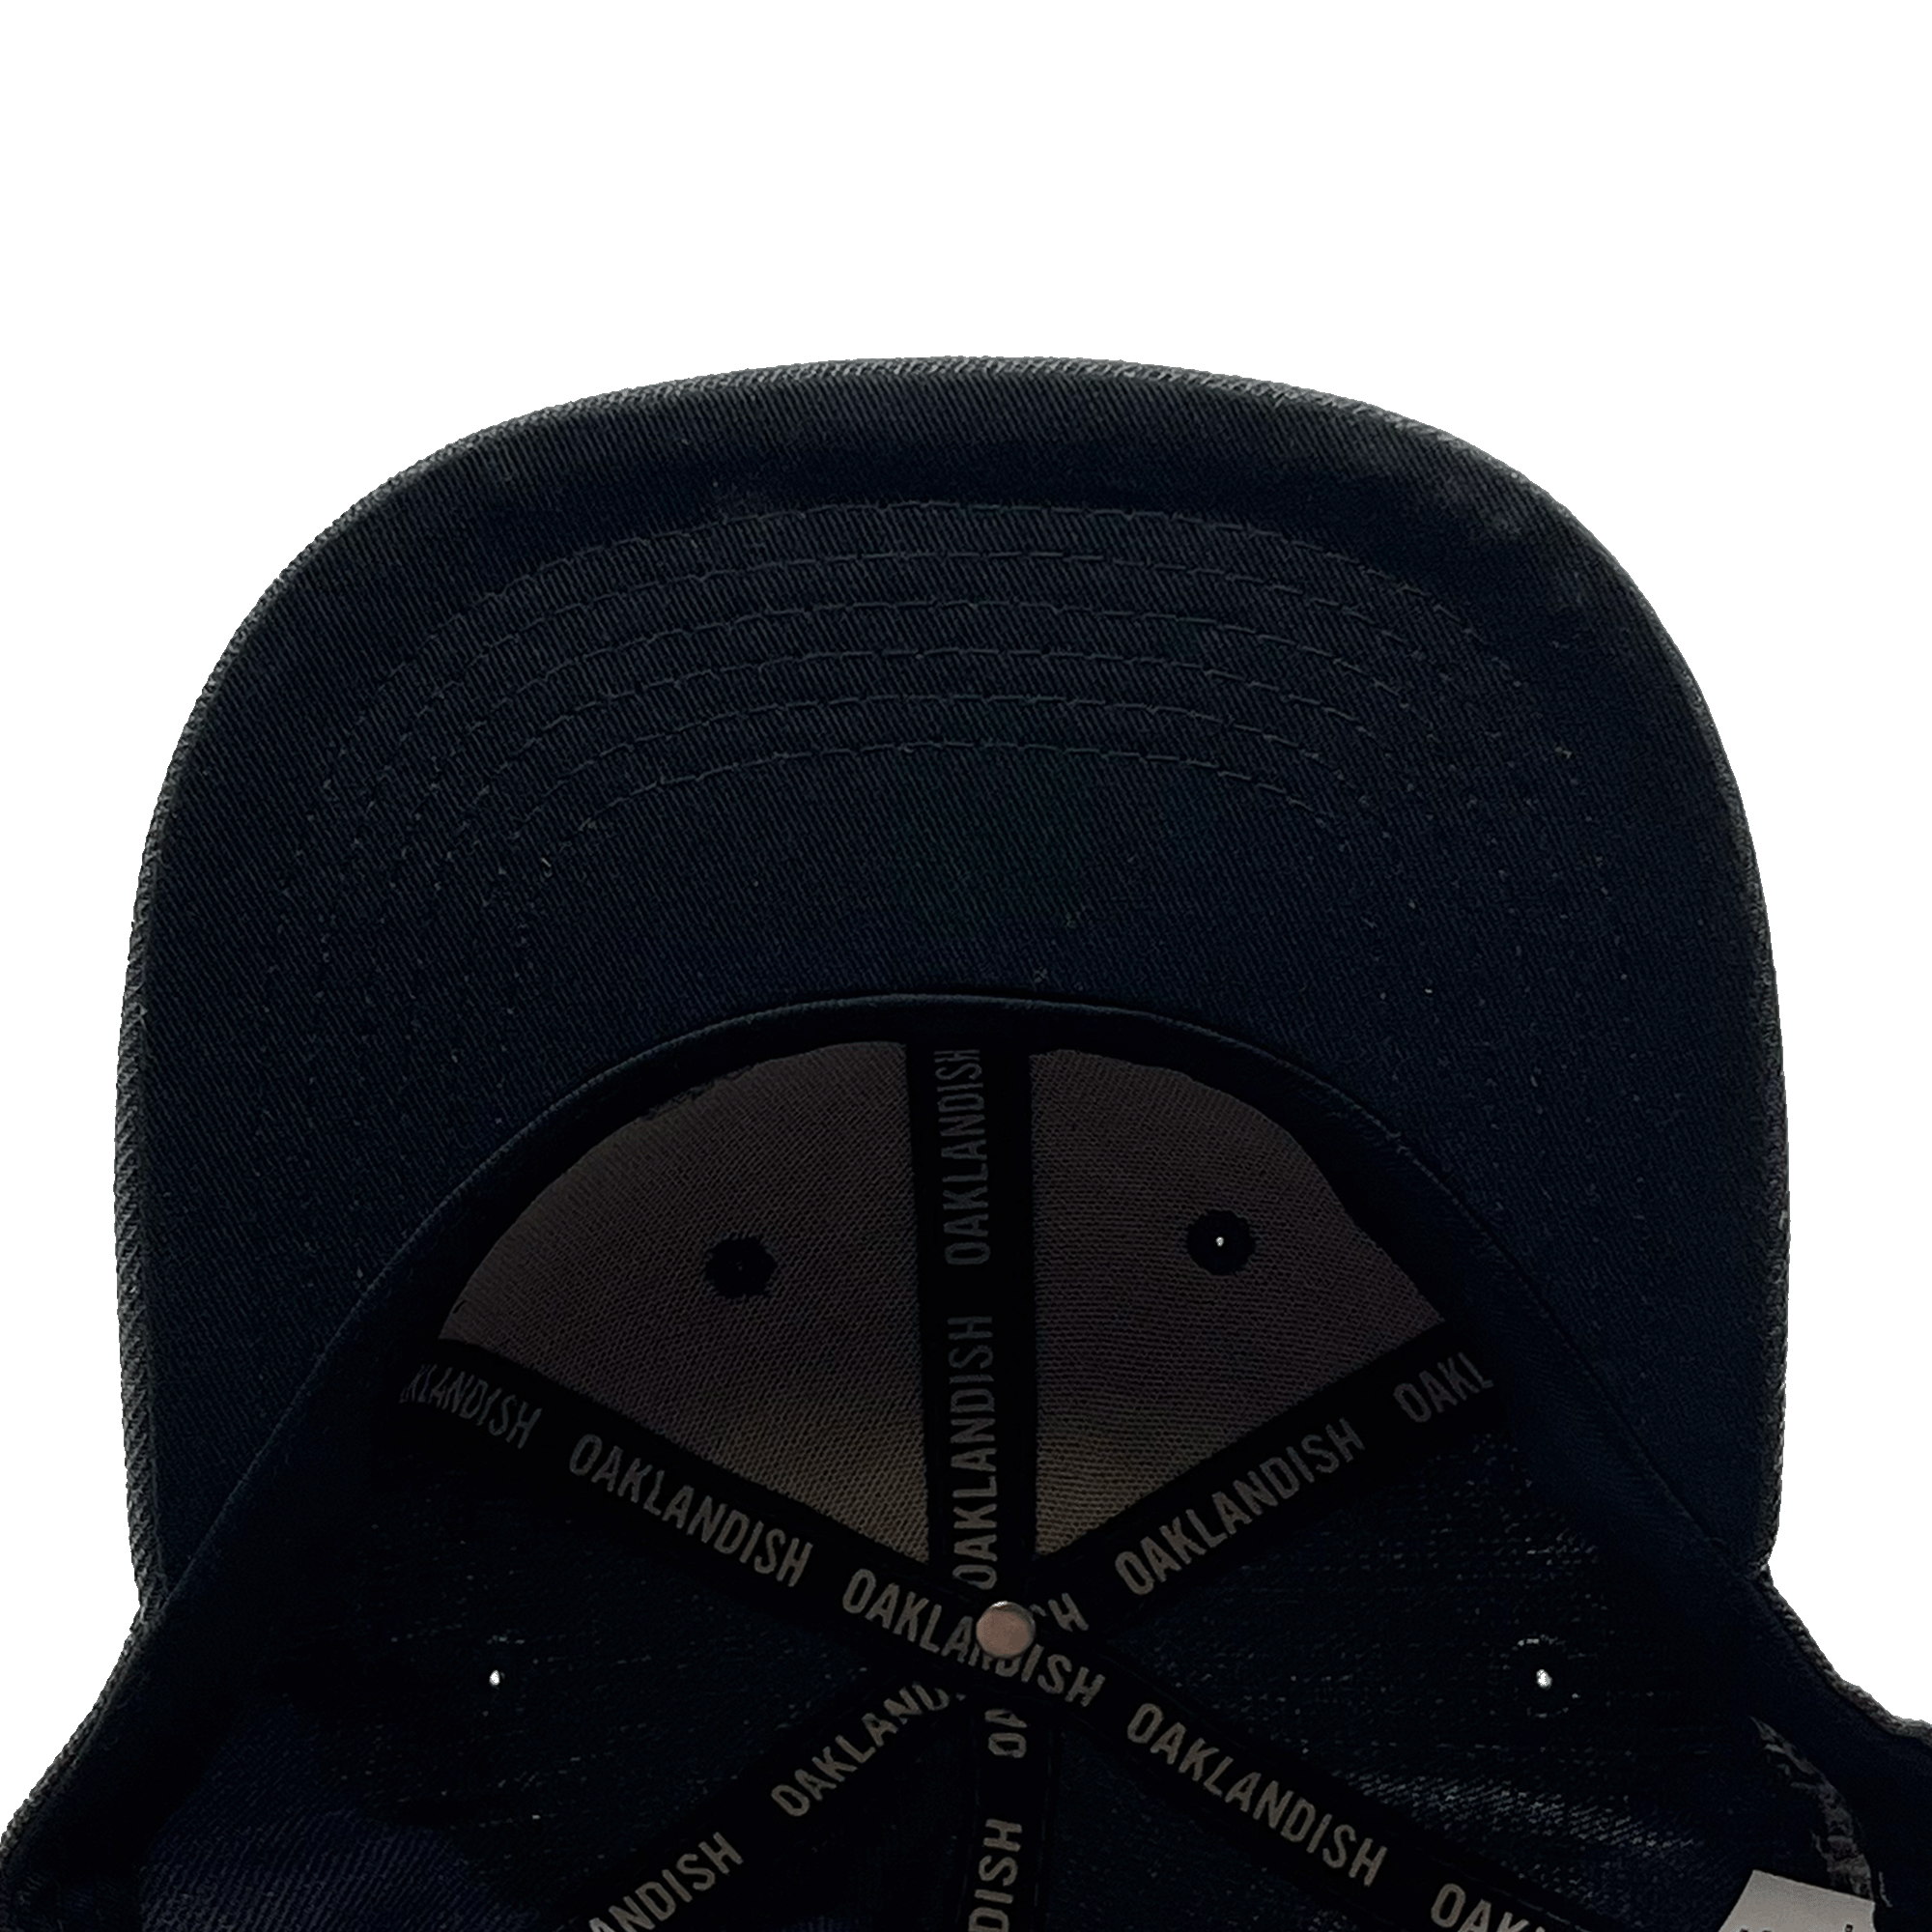 The underside view of a square flat bill one a charcoal hat.